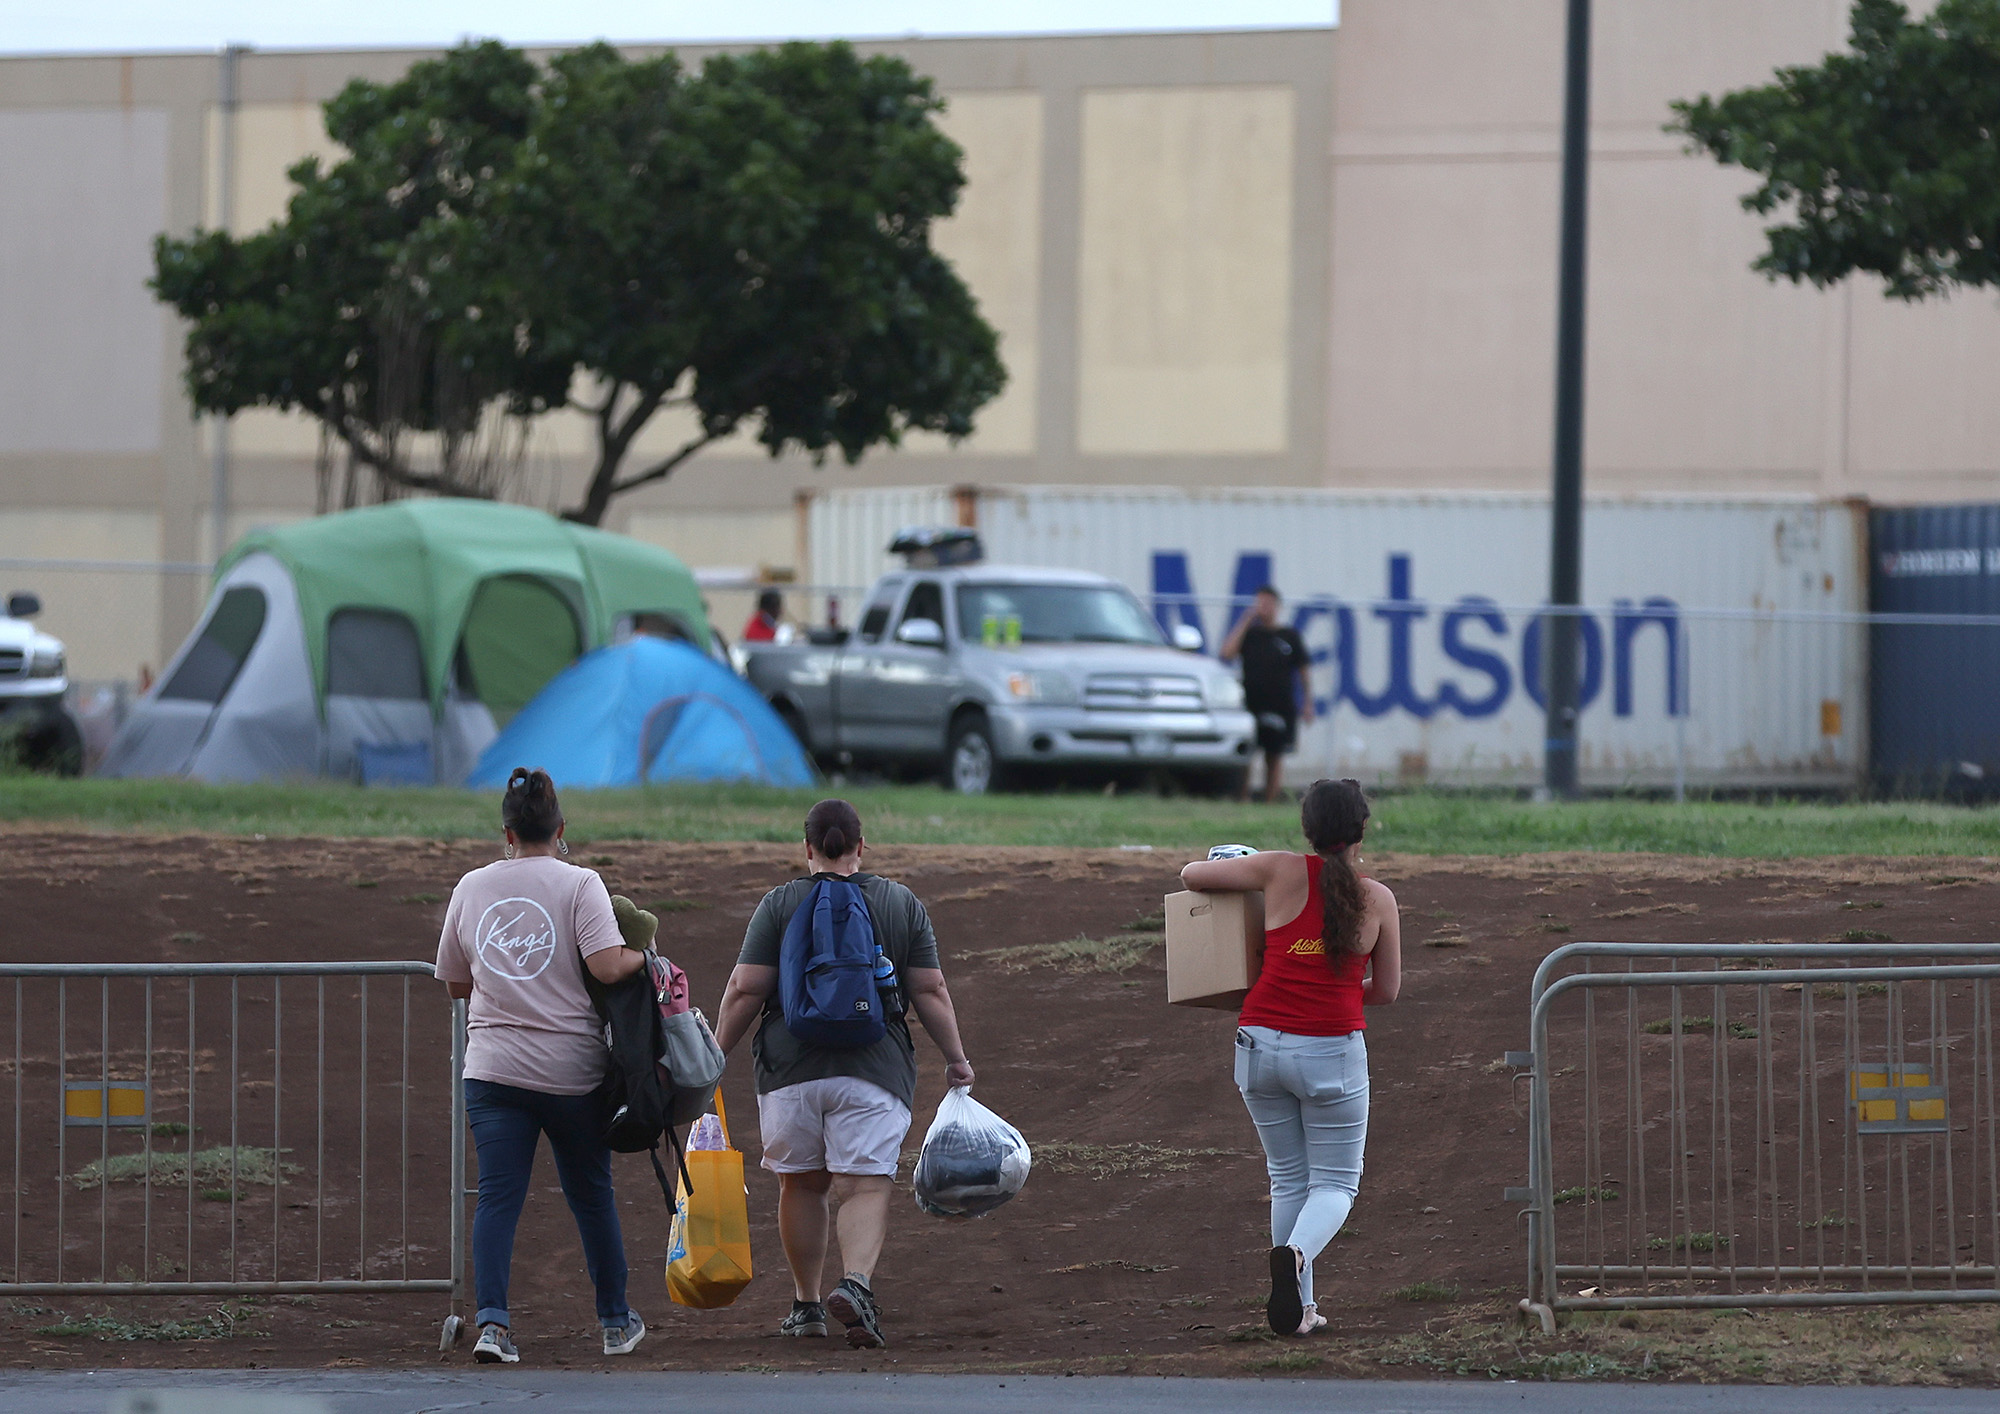 Volunteers with King's Cathedral Maui bring supplies to a displaced family that is camping on church property on August 10, in Kahului, Hawaii.